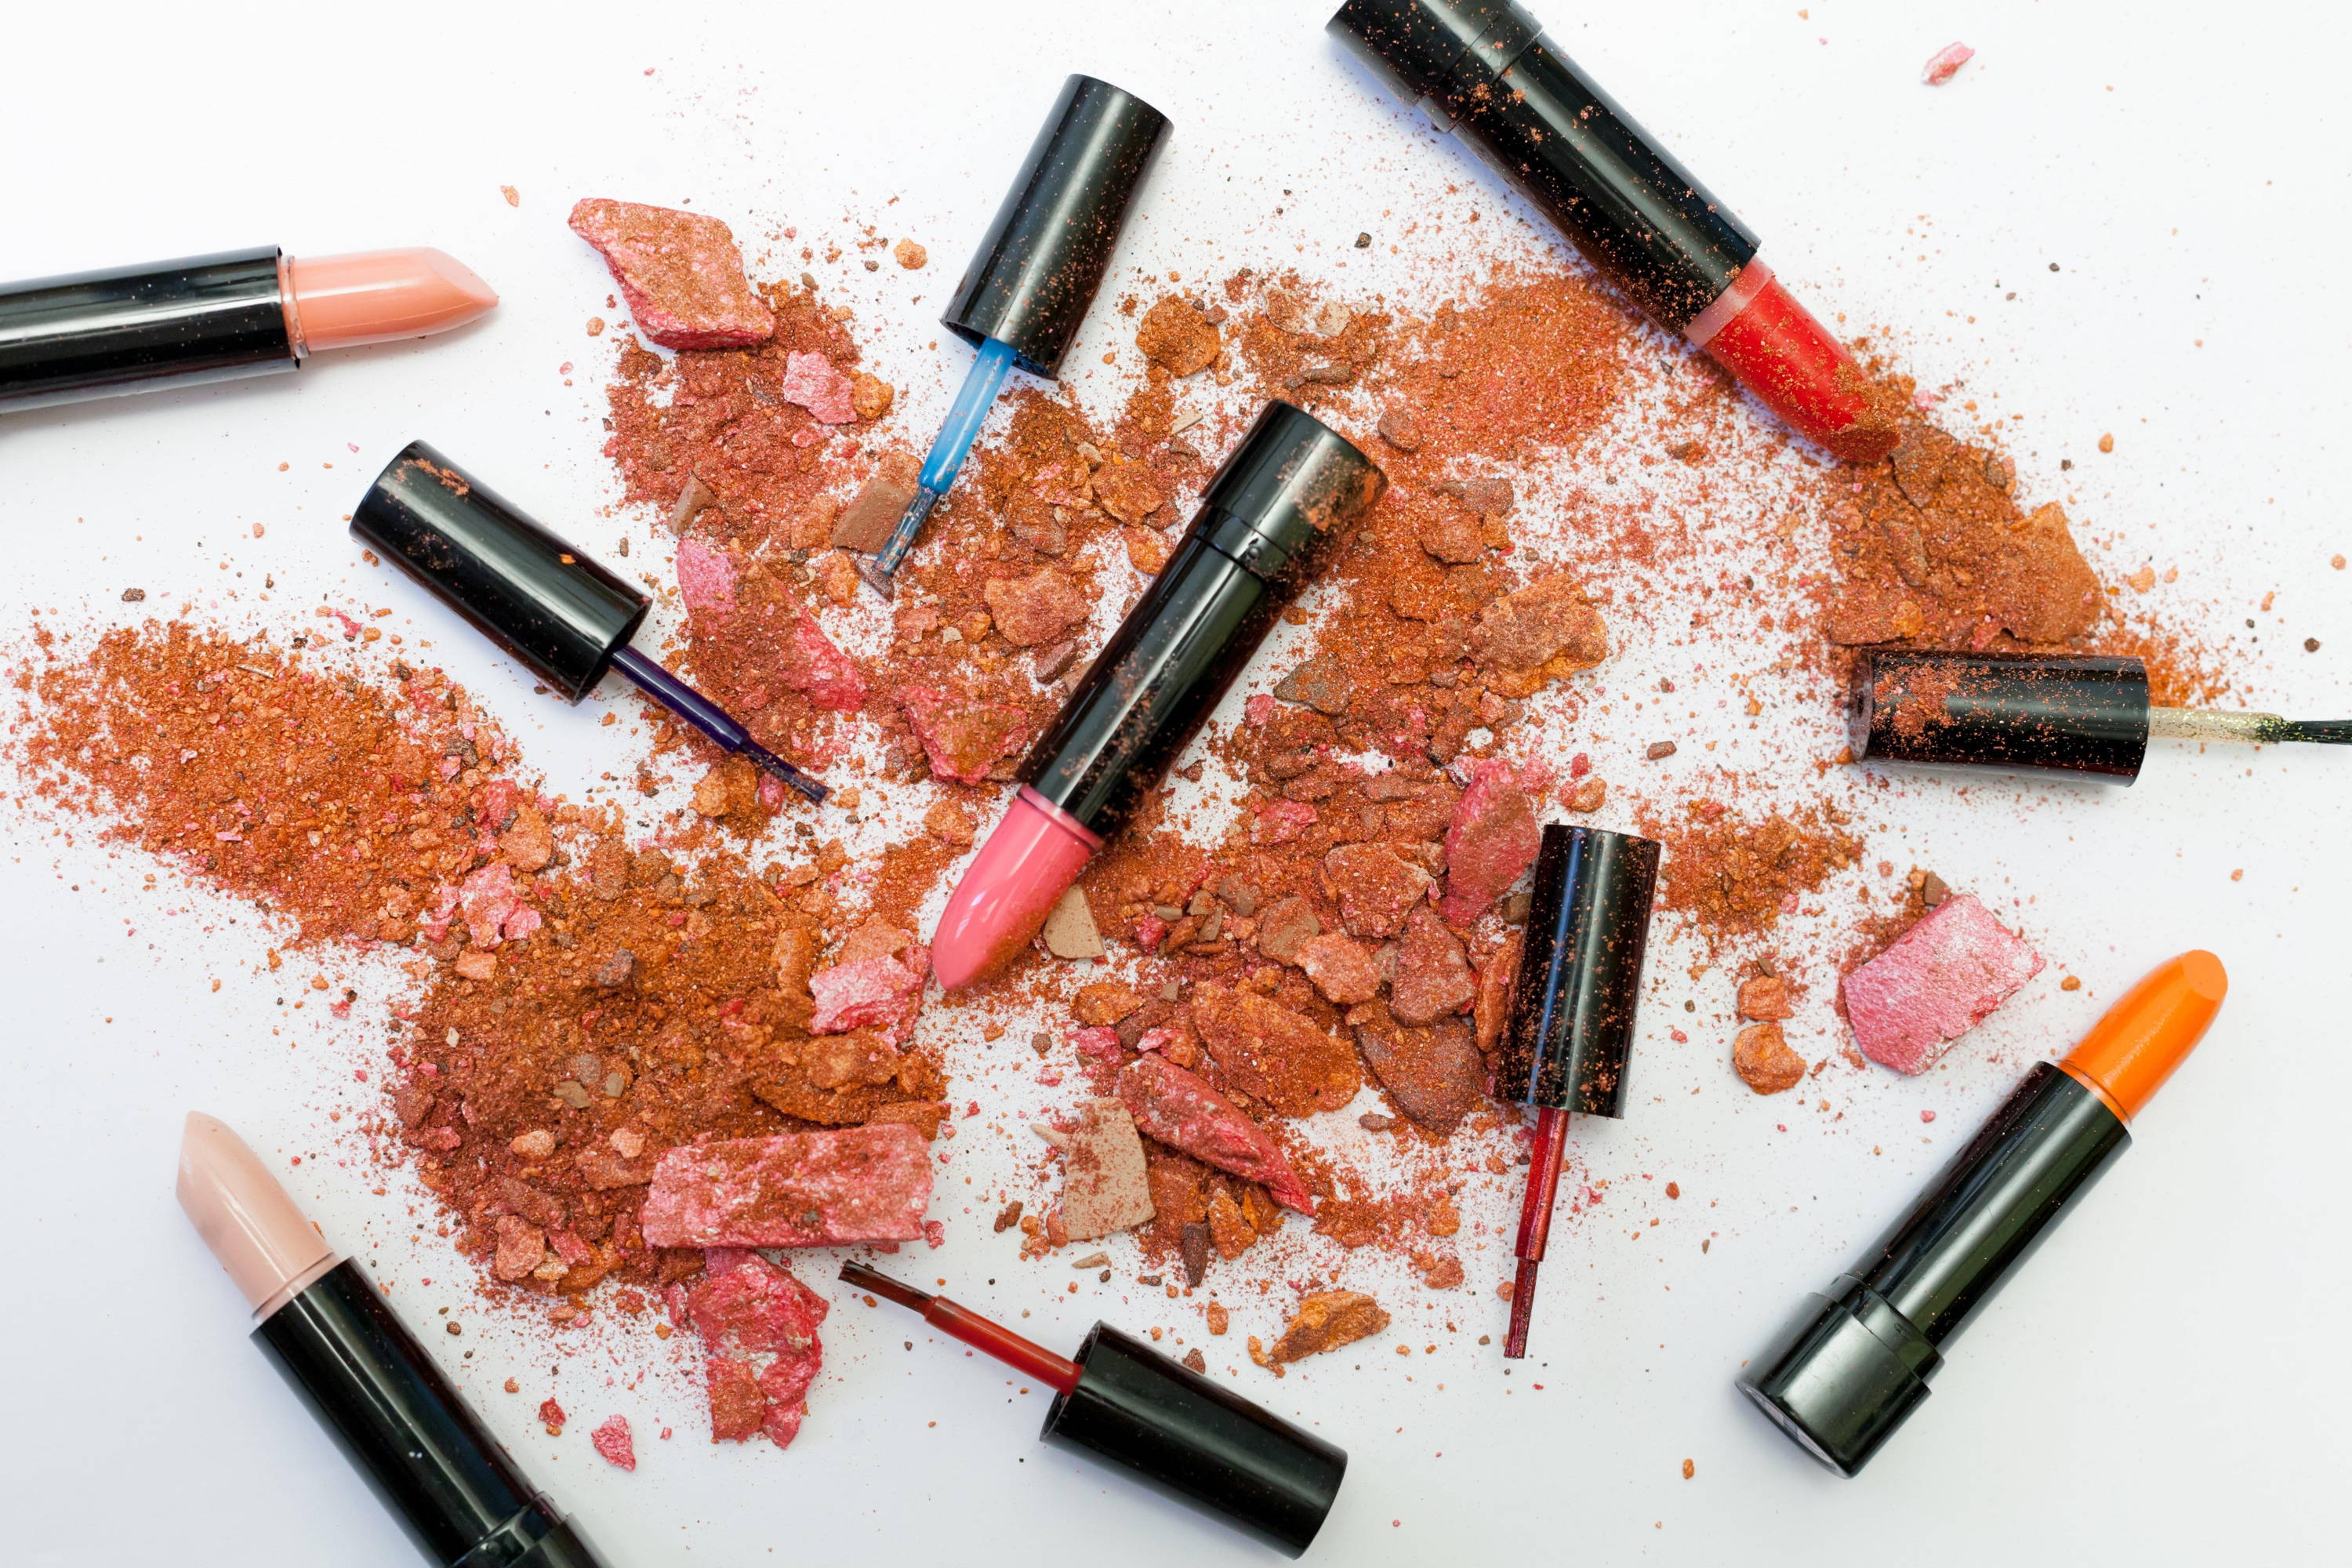 Cosmetics are more harmful than you may think. Here's the reality behind the cruelty and pollution caused by the cosmetic industry, and how you can be part of the solution. 